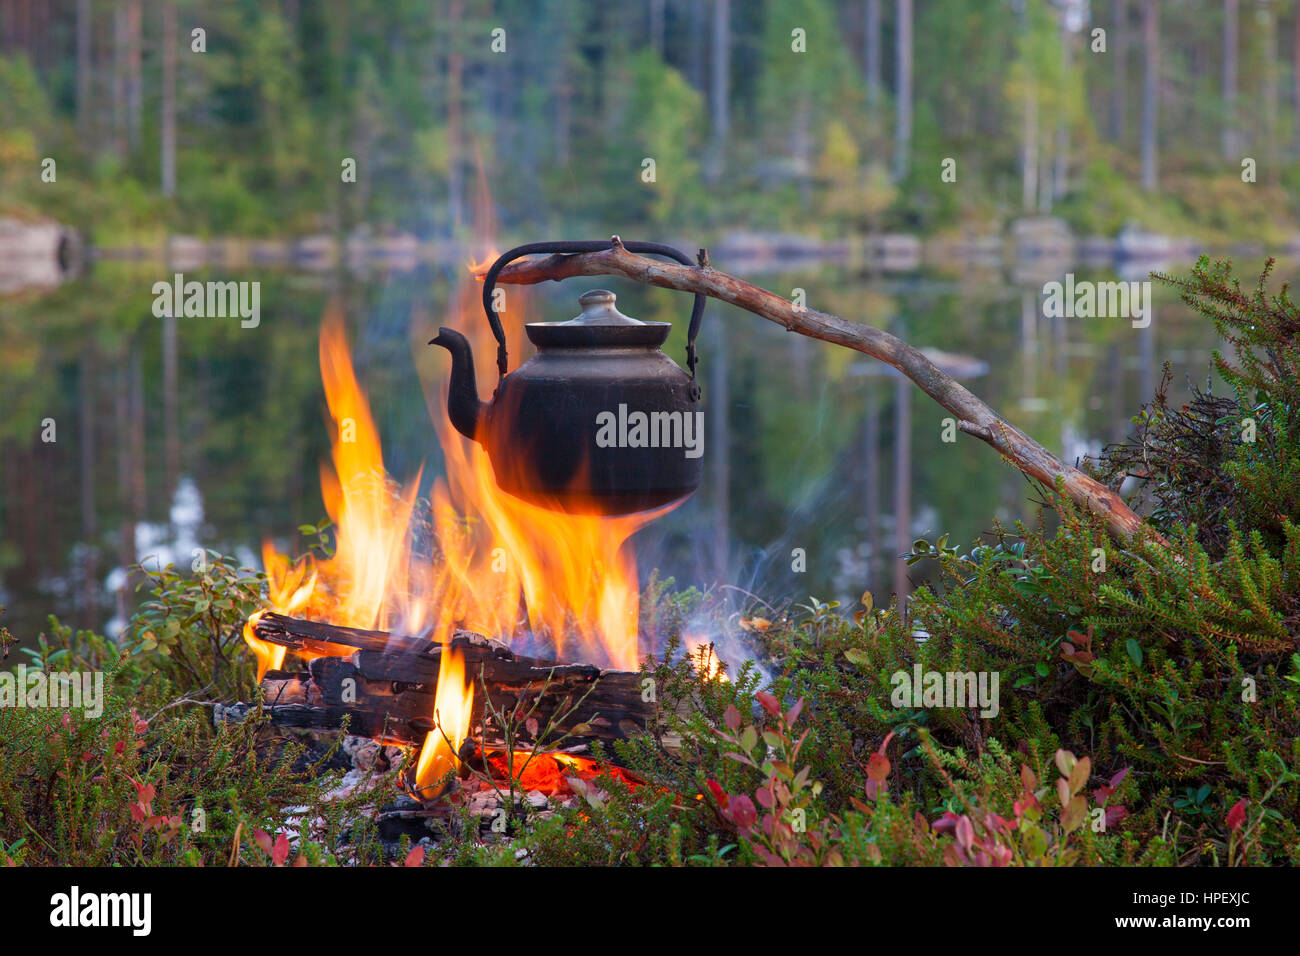 Blackened tin kettle boiling water over flames from campfire during hike along lake Stock Photo